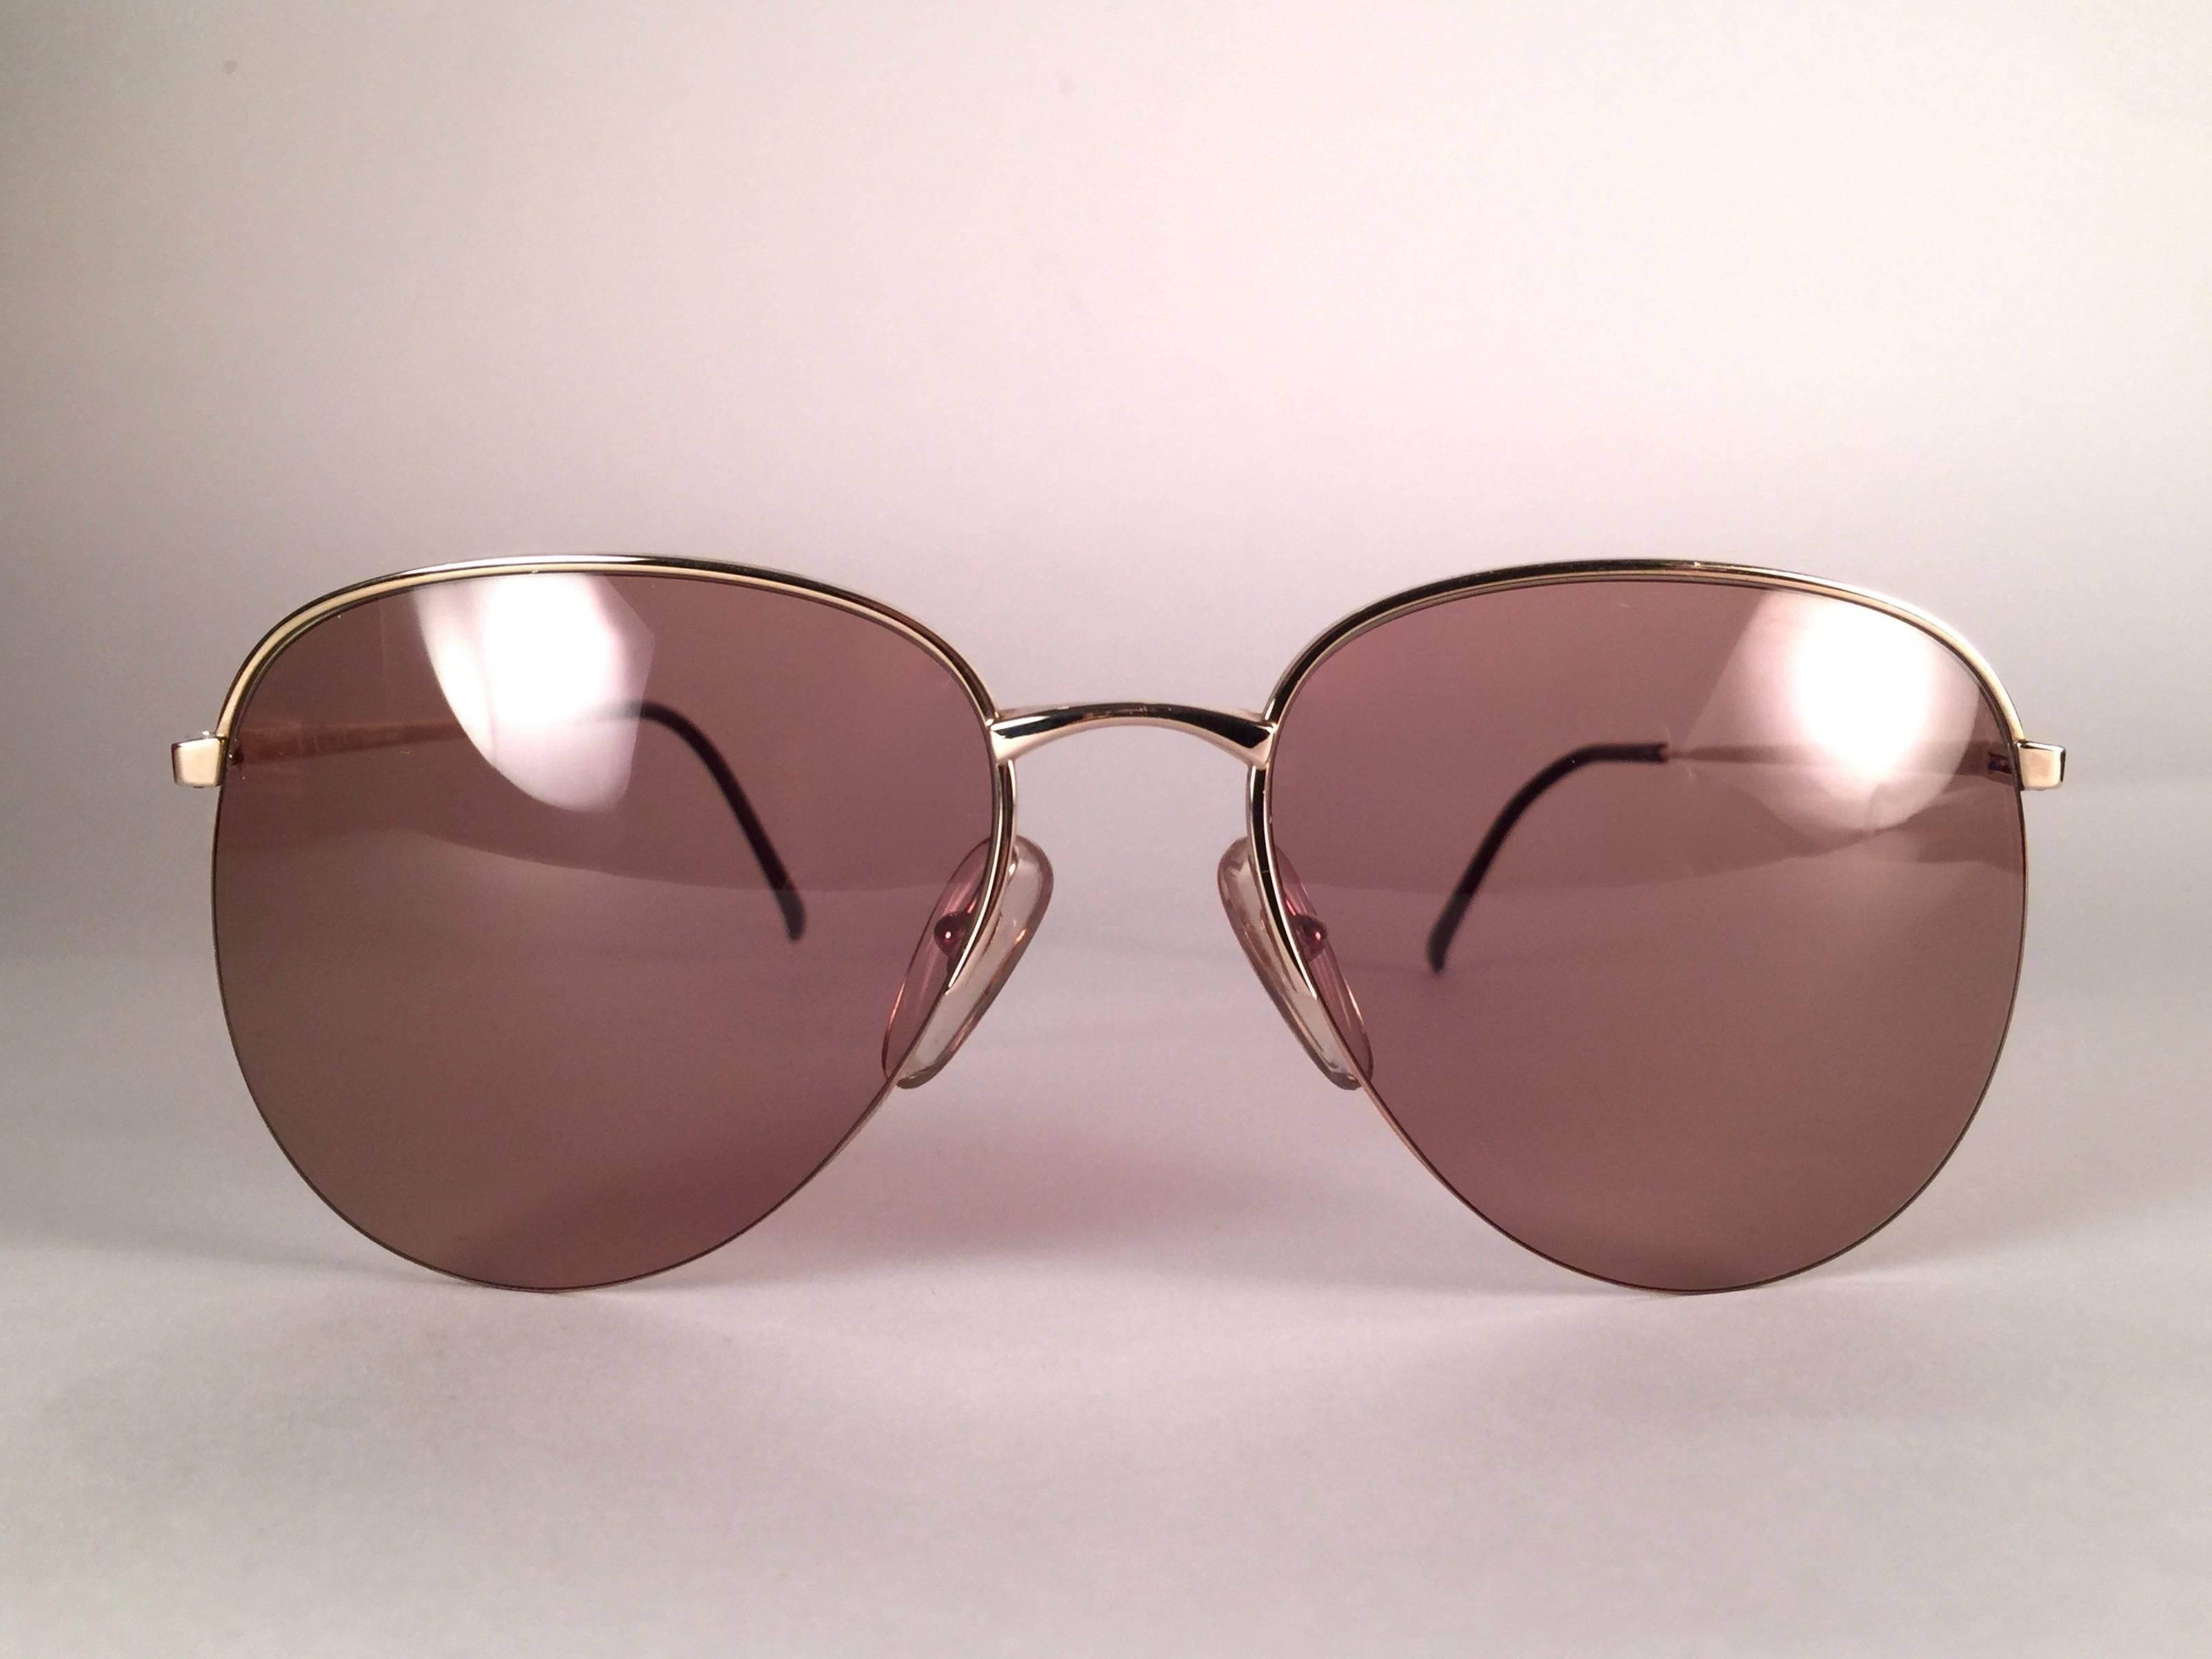 New Vintage Christian Dior 2237 Gold Half frame sunglasses with spotless light brown lenses. 
Designed and produced in the1980’s.  
Made by Optyl. Manufactured in Germany.   New! never worn or displayed. Flawless pair!